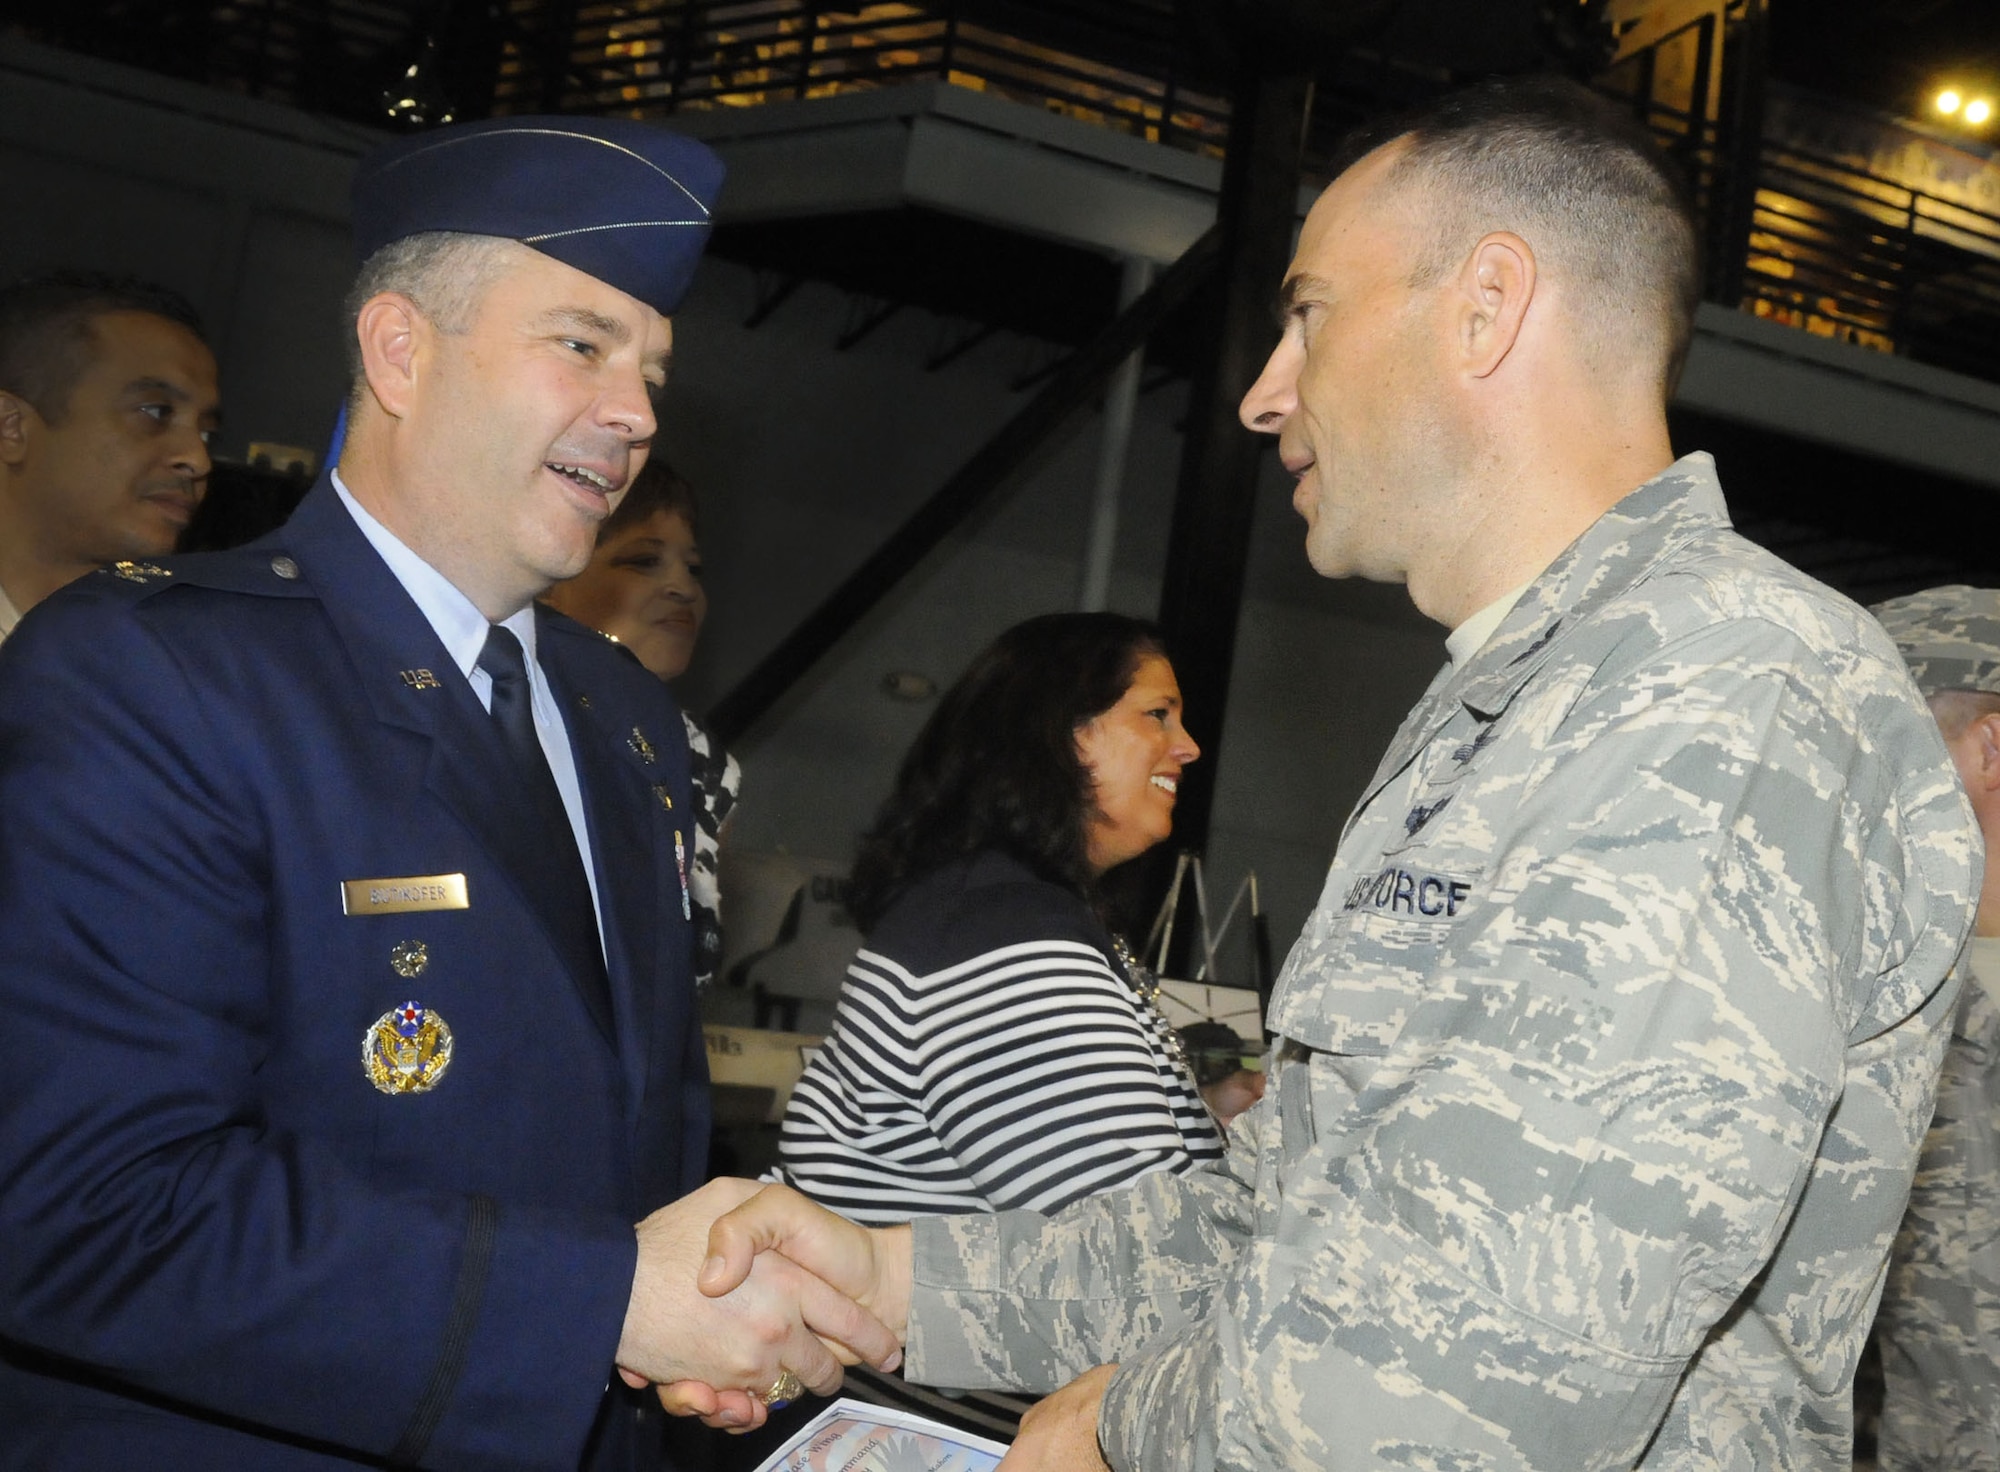 Colonel Mitchel H. Butikofer, 78th Air Base Wing commander, shakes hands with Col. Kevin Krause, 5th Combat Communications commander. Col. Butikofer and his wife Leslie, center, were welcomed at a reception after the change of command ceremony. U. S. Air Force photo by Sue Sapp